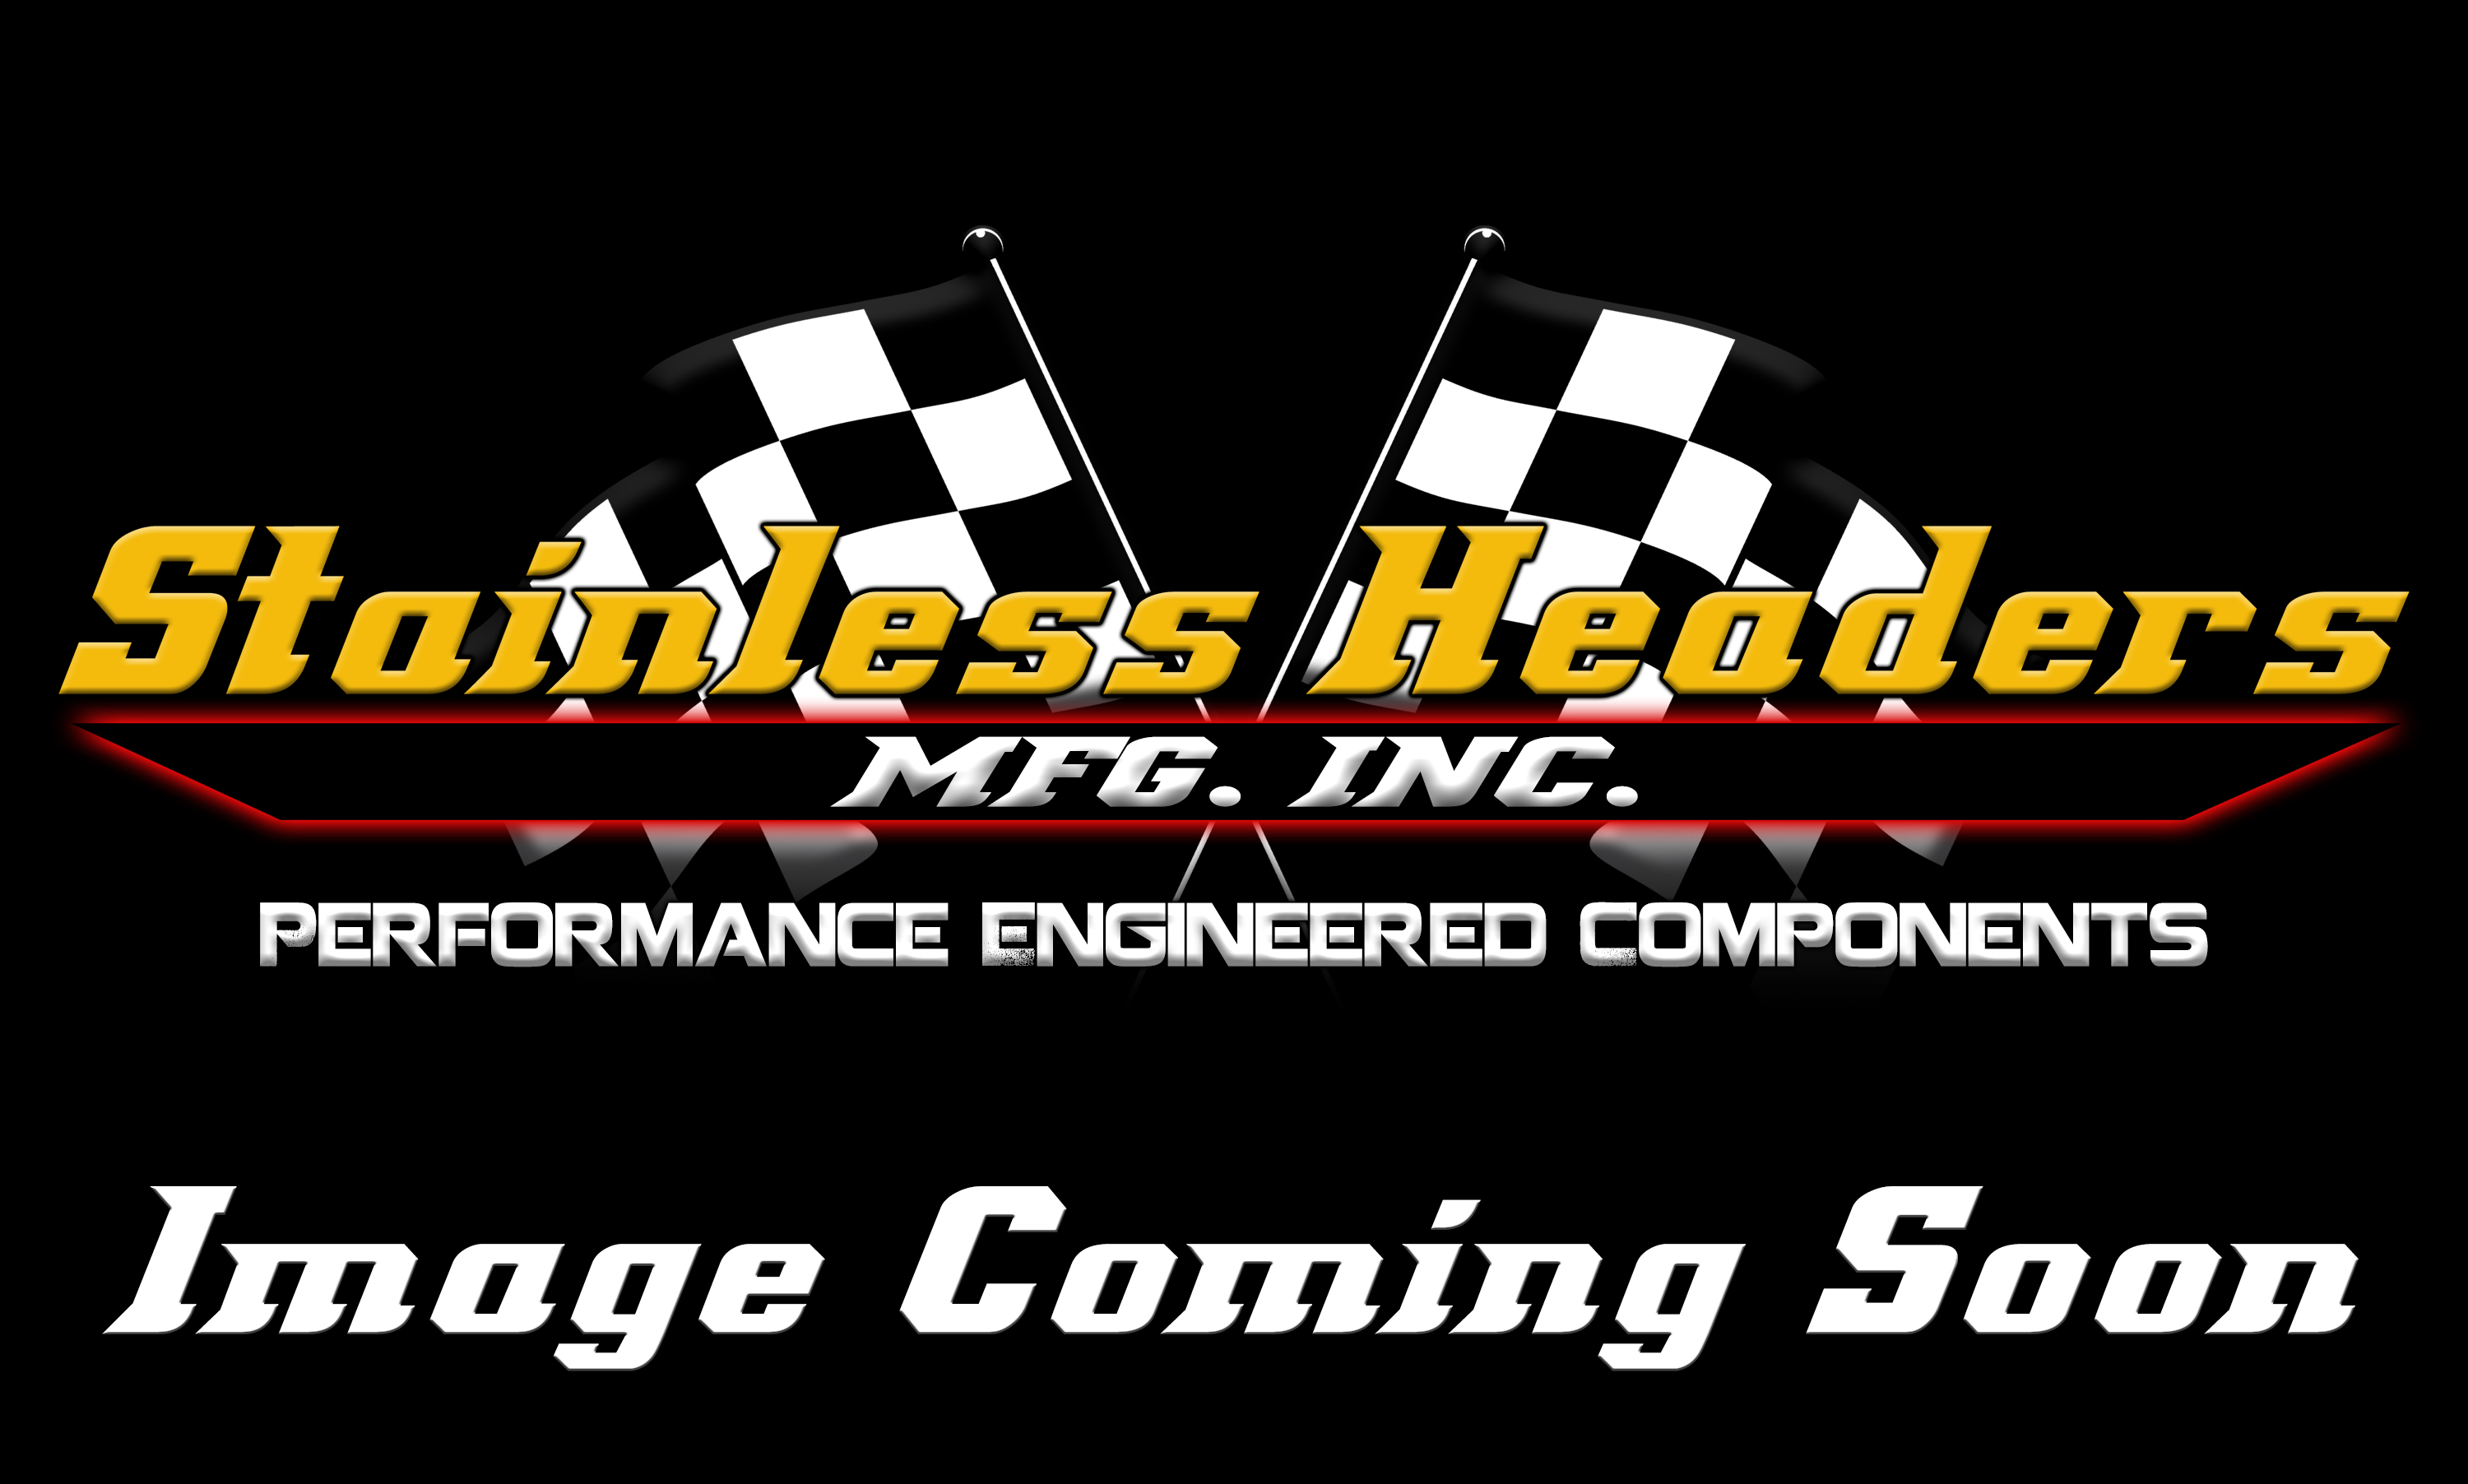 Stainless Headers - 2 1/8" Primary 6 into 1 Performance Merge Collector-16ga 304ss